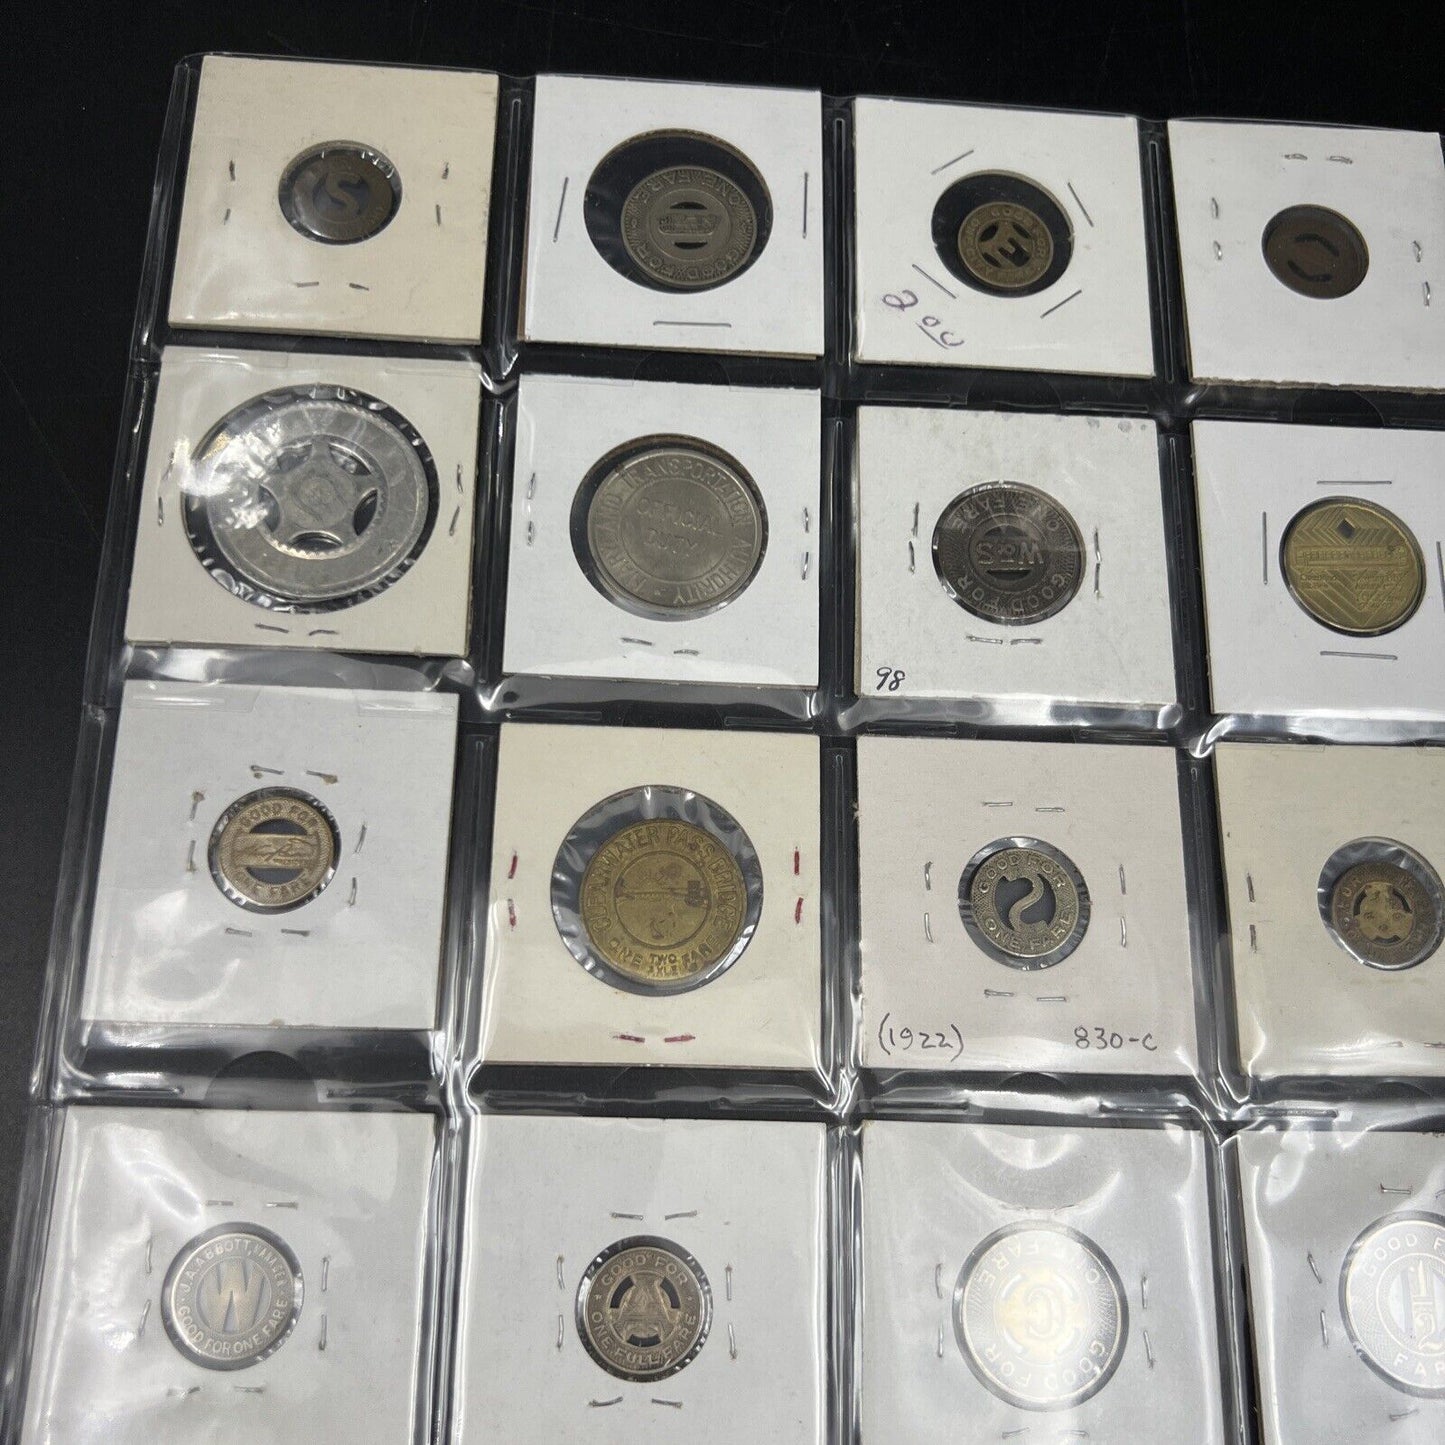 Lot of 20 United States Transit Tokens Coin Collection #4